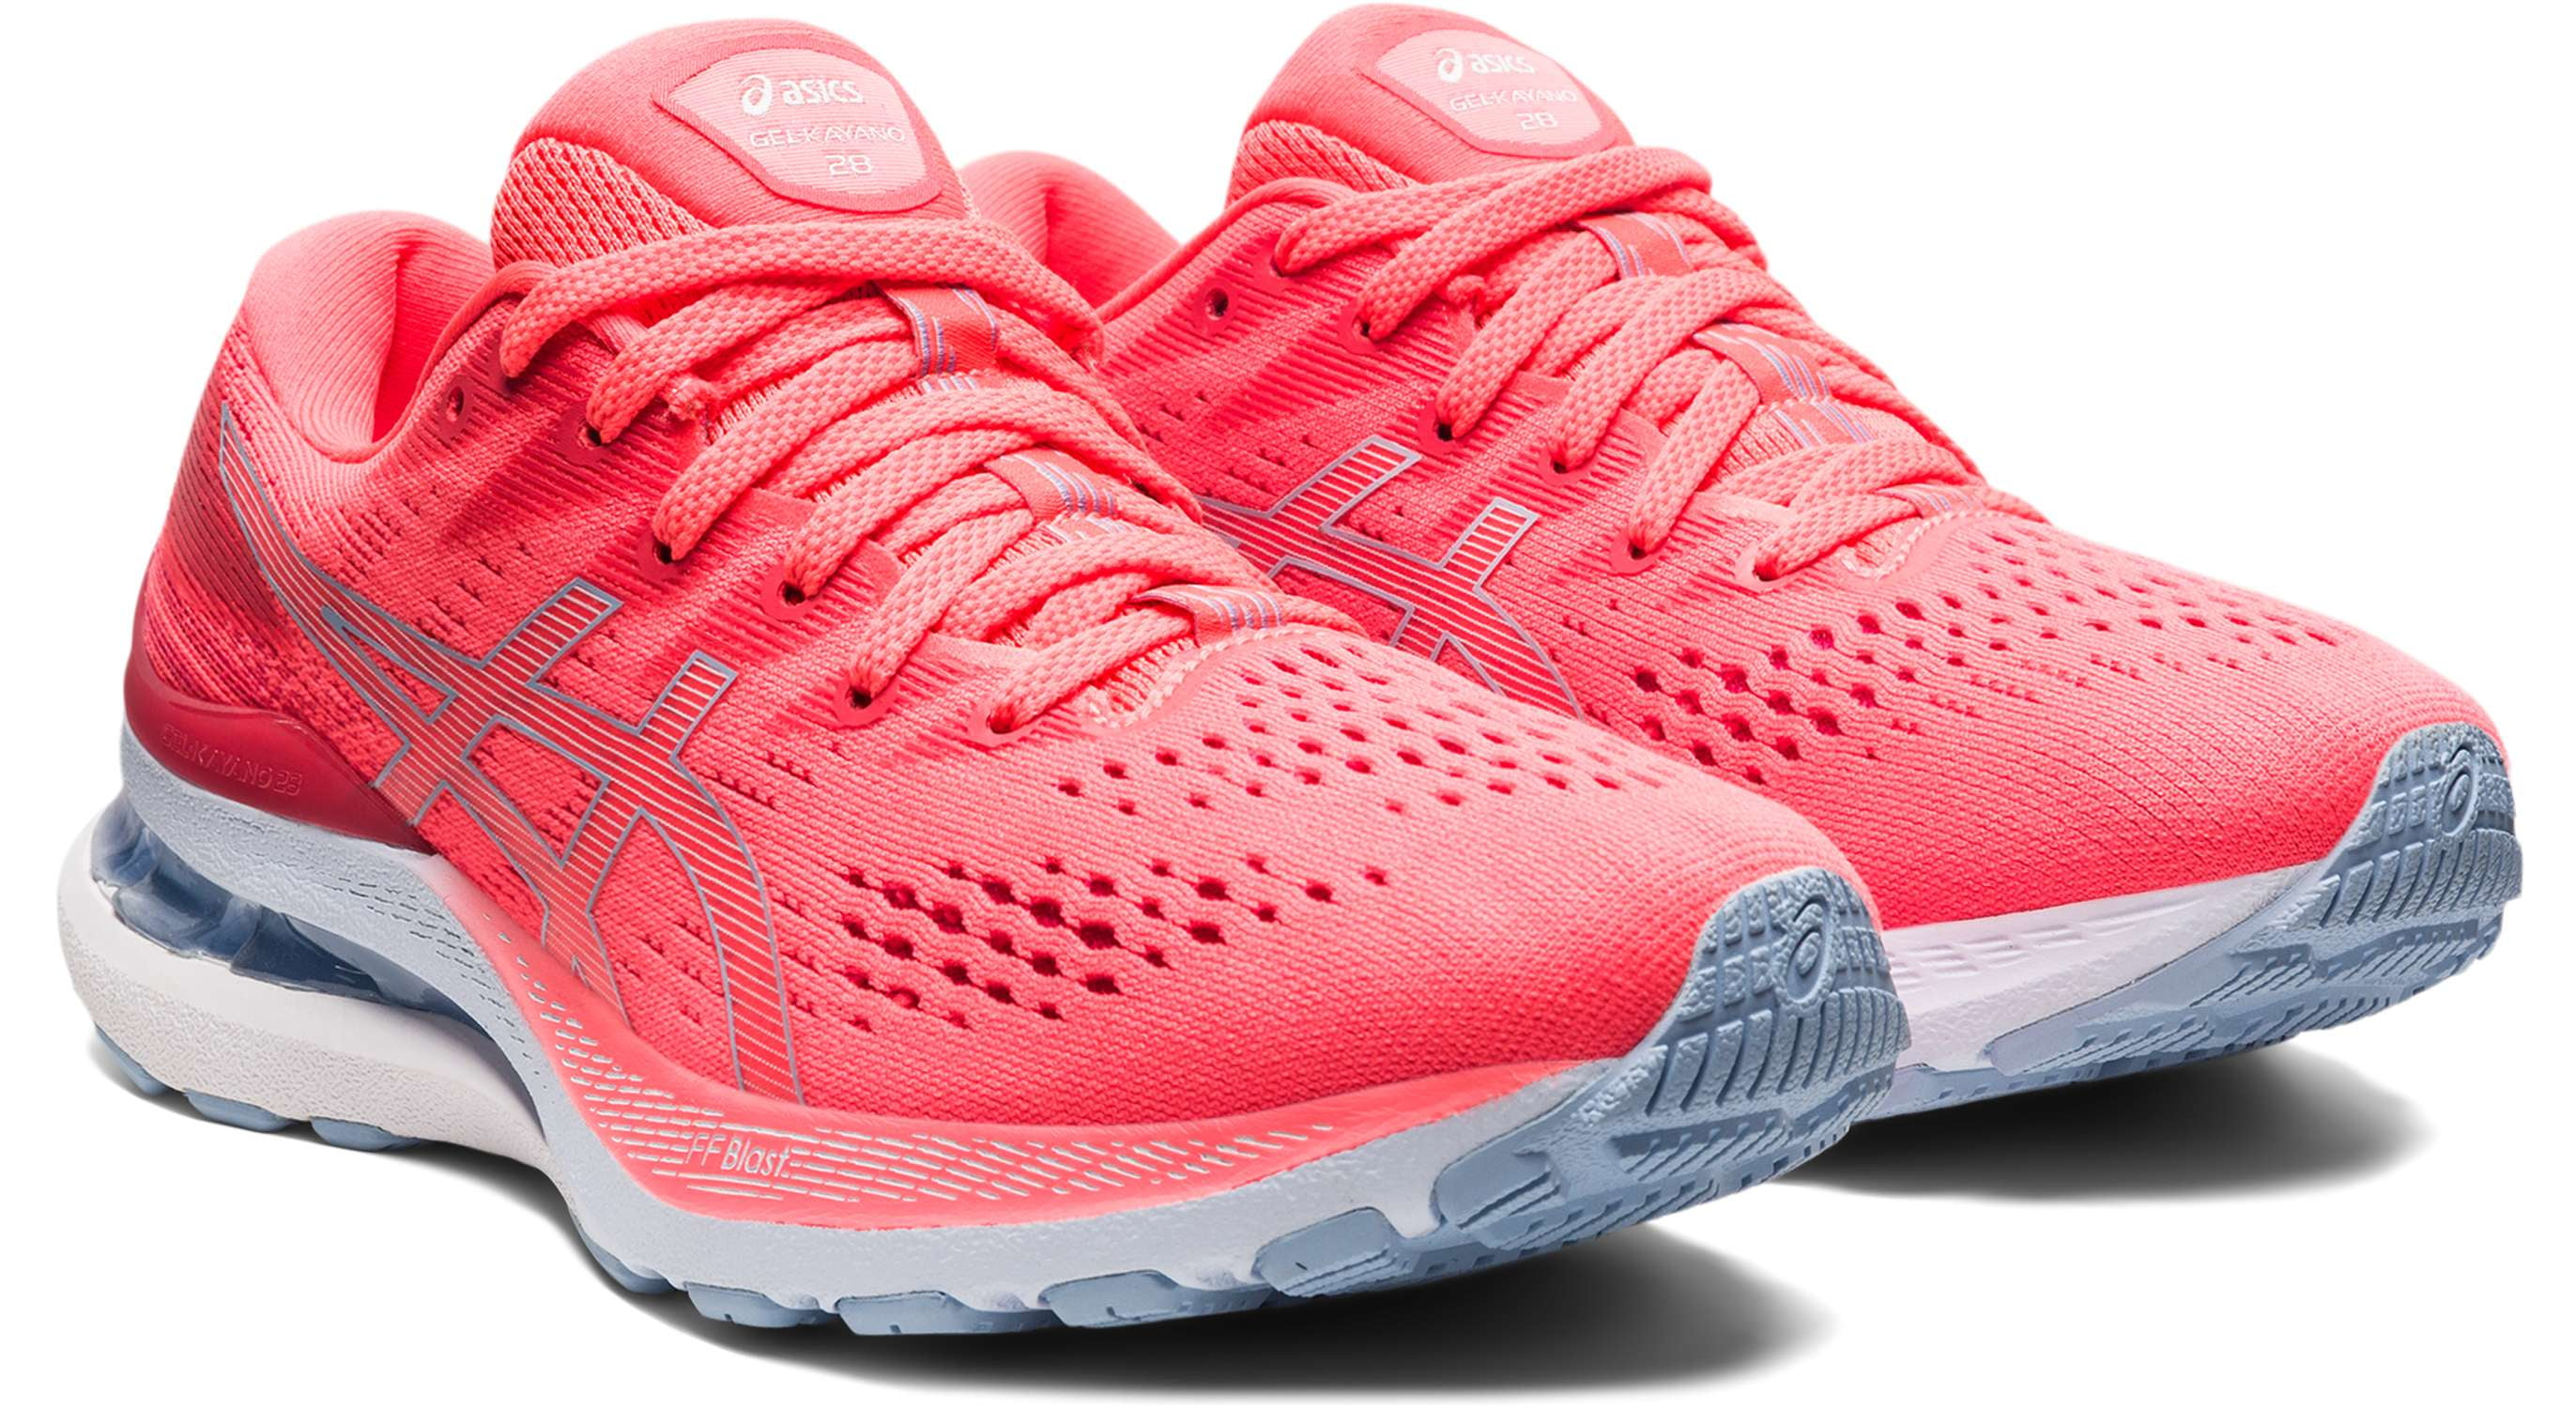 Asics Women's Gel-Kayano 28 Running Shoes in Blazing Coral /Mist - Running Shoes - Asics - ATR Sports